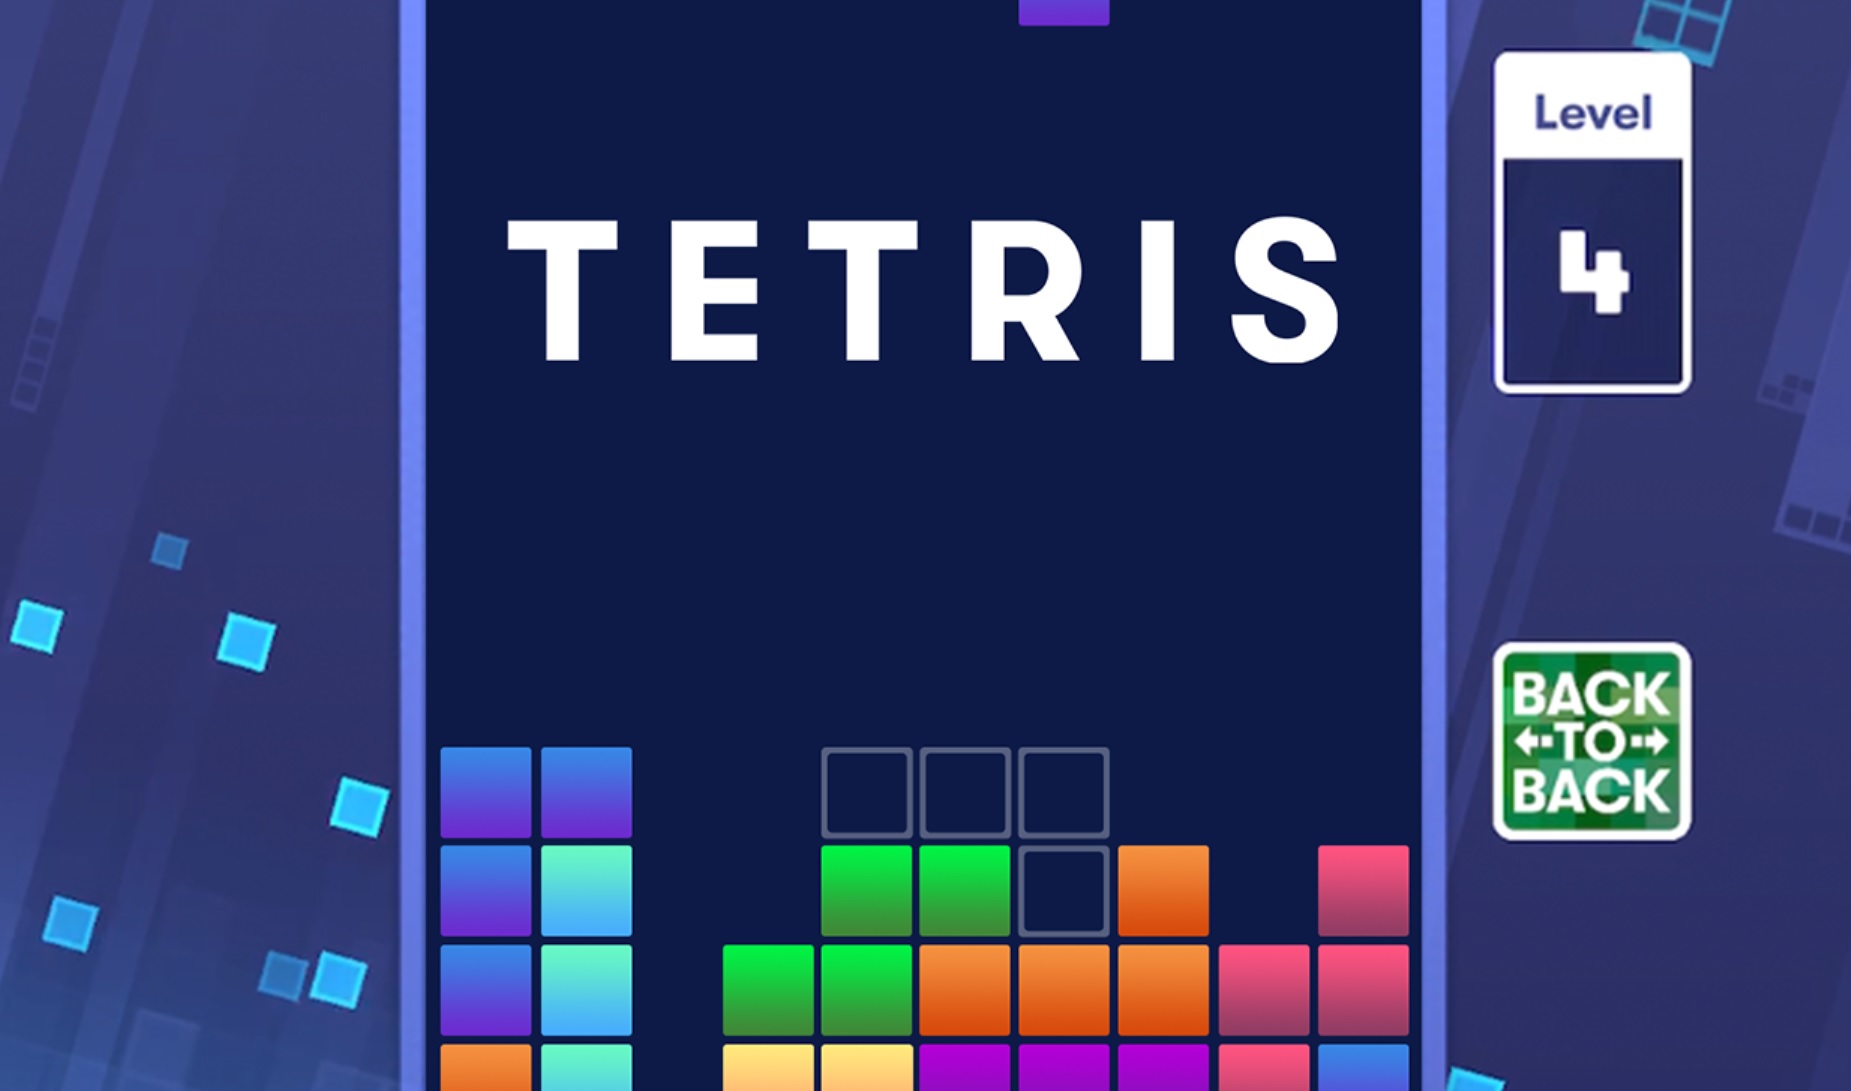 Tetris - Most Downloaded PC Video Games in the World